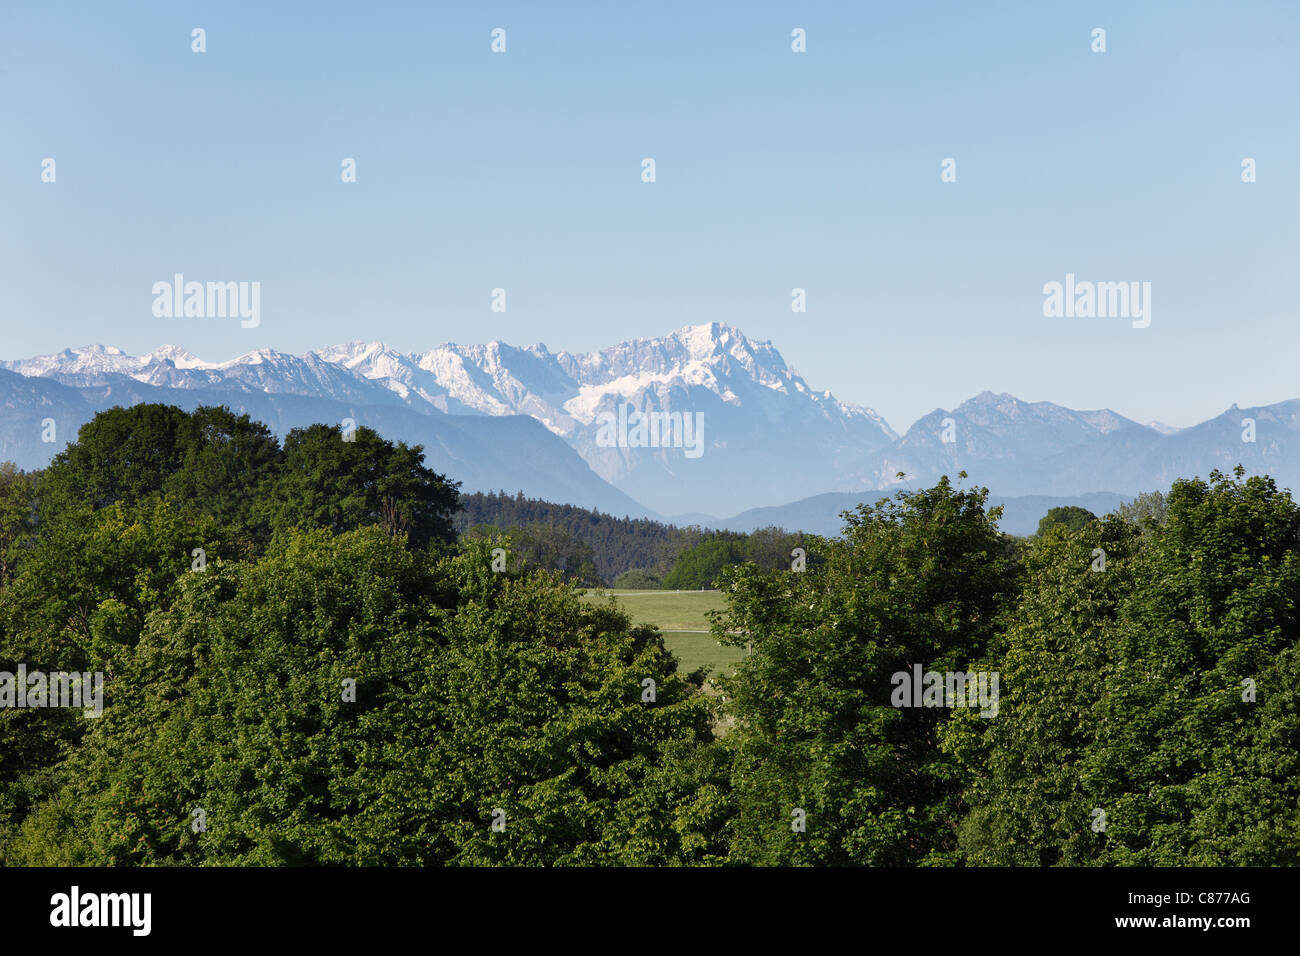 Germany, Bavaria, Upper Bavaria, Egling, View of forest landscape with Alps and Zugspitze mountains in background Stock Photo